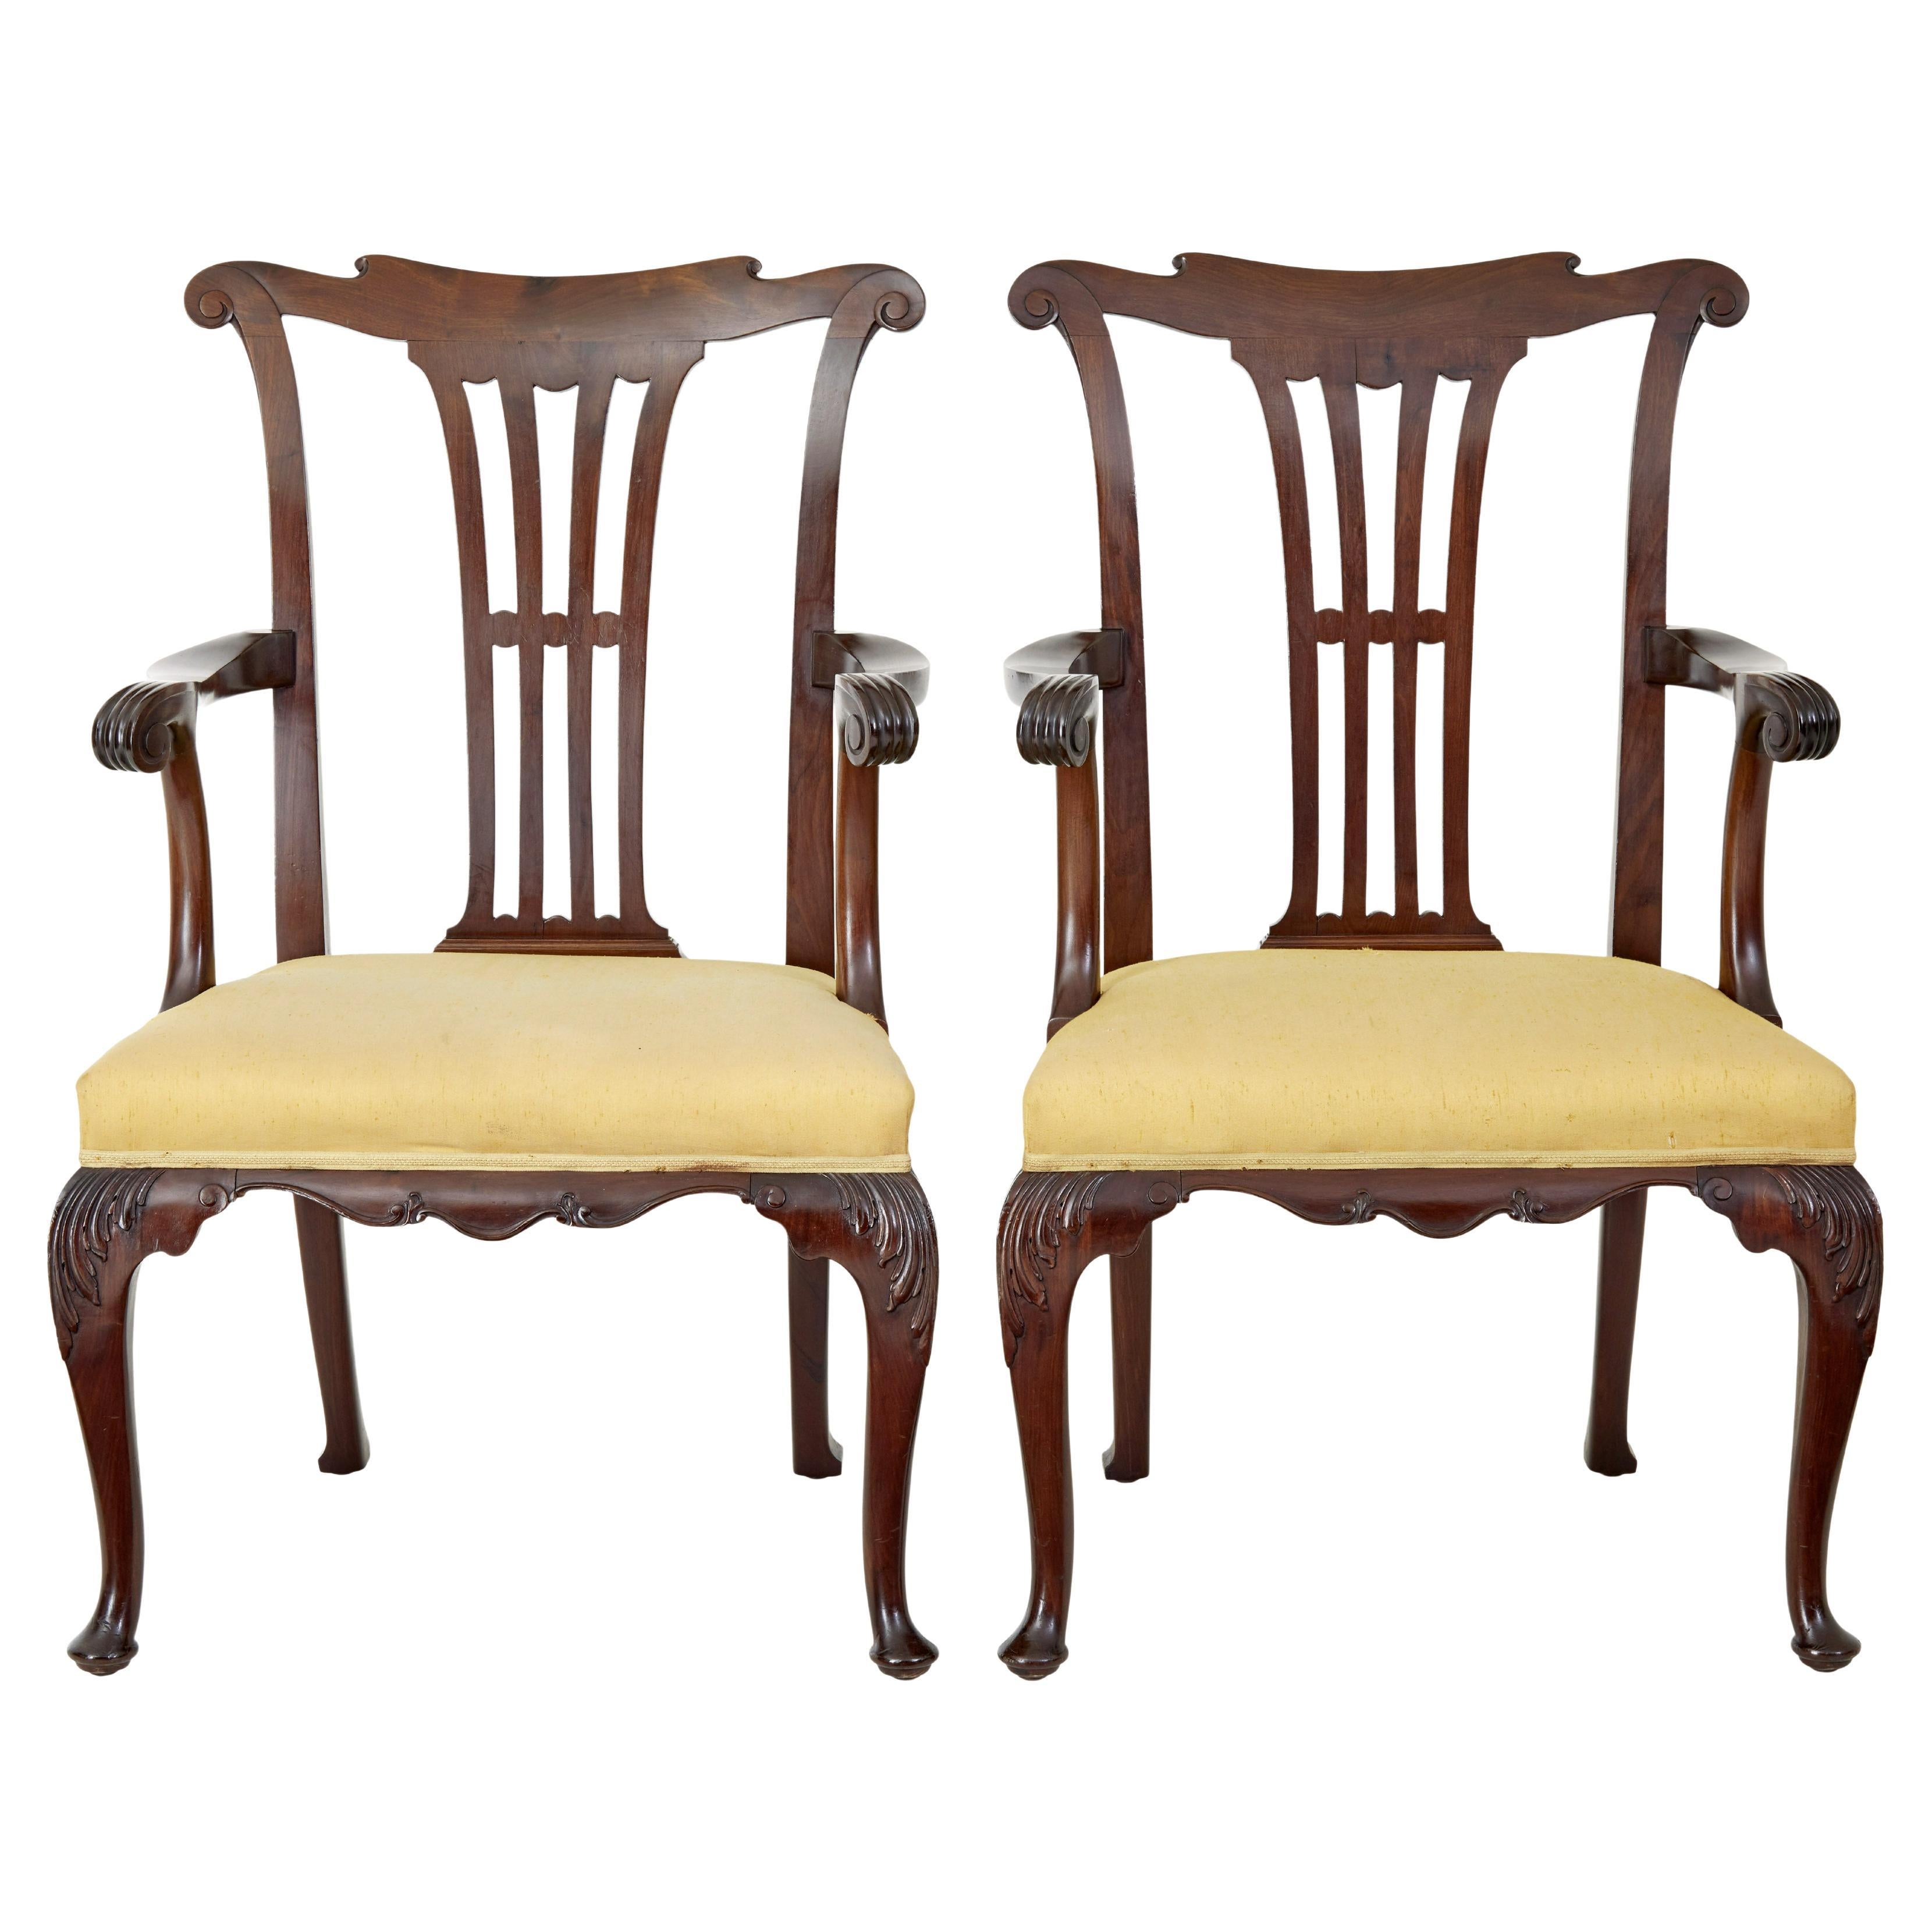 Pair of 19th century chippendale design mahogany armchairs For Sale